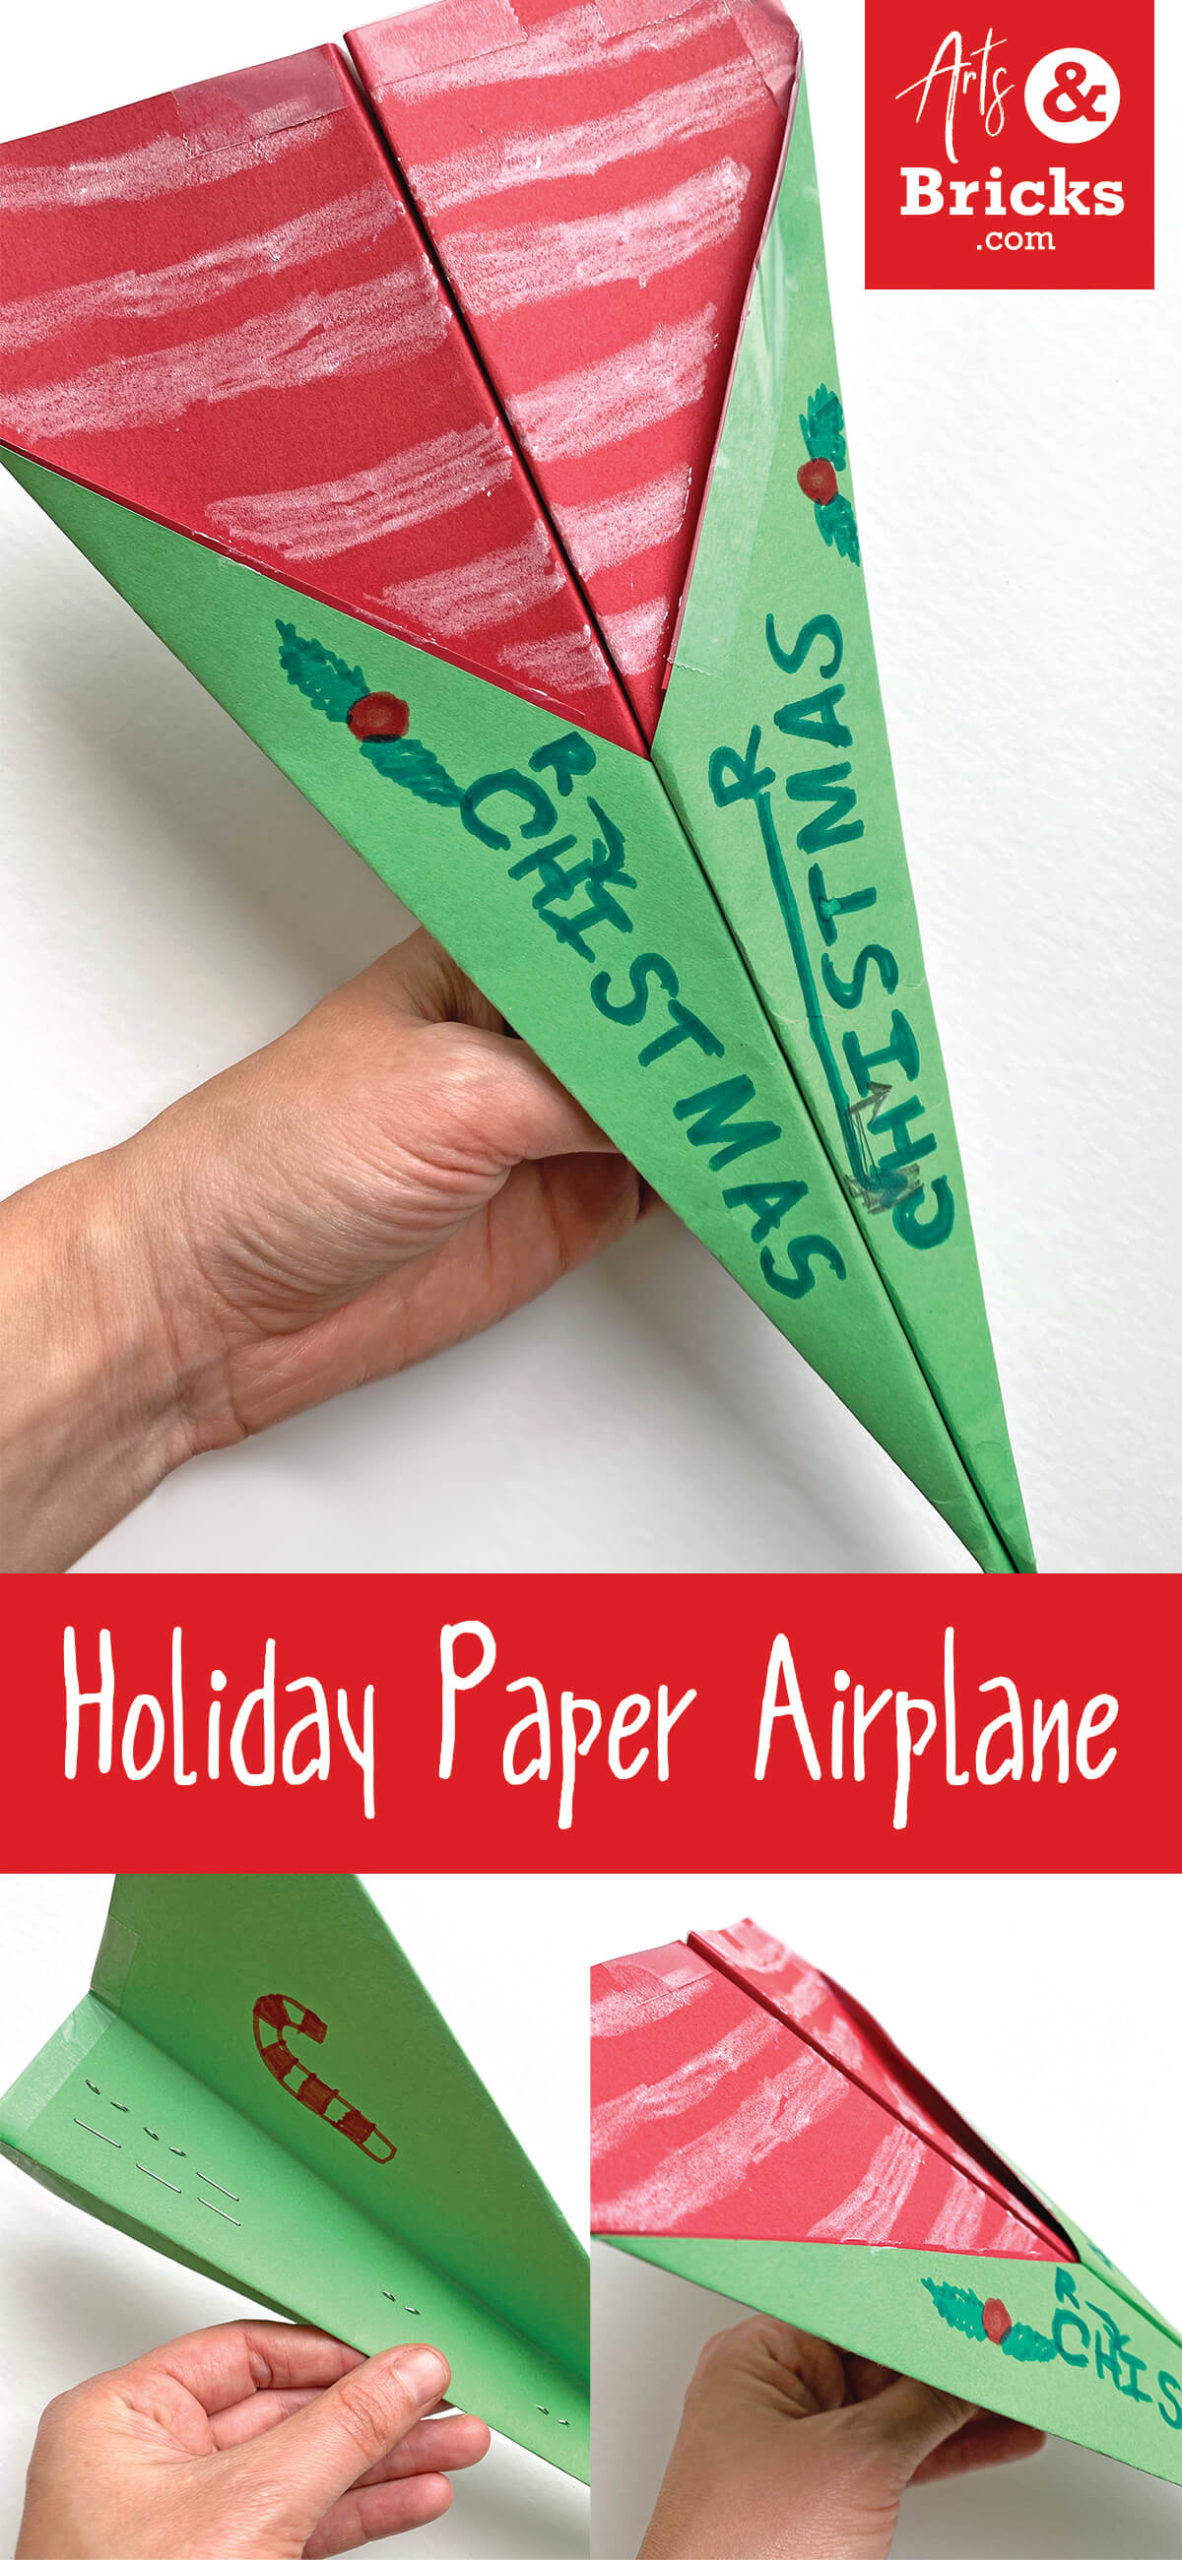 Find inspiration for a Christmas-themed paper airplane! Candy-cane striping, holly berries and lots of Christmas Cheer! We used card stock, tape, staples, markers and crayons!